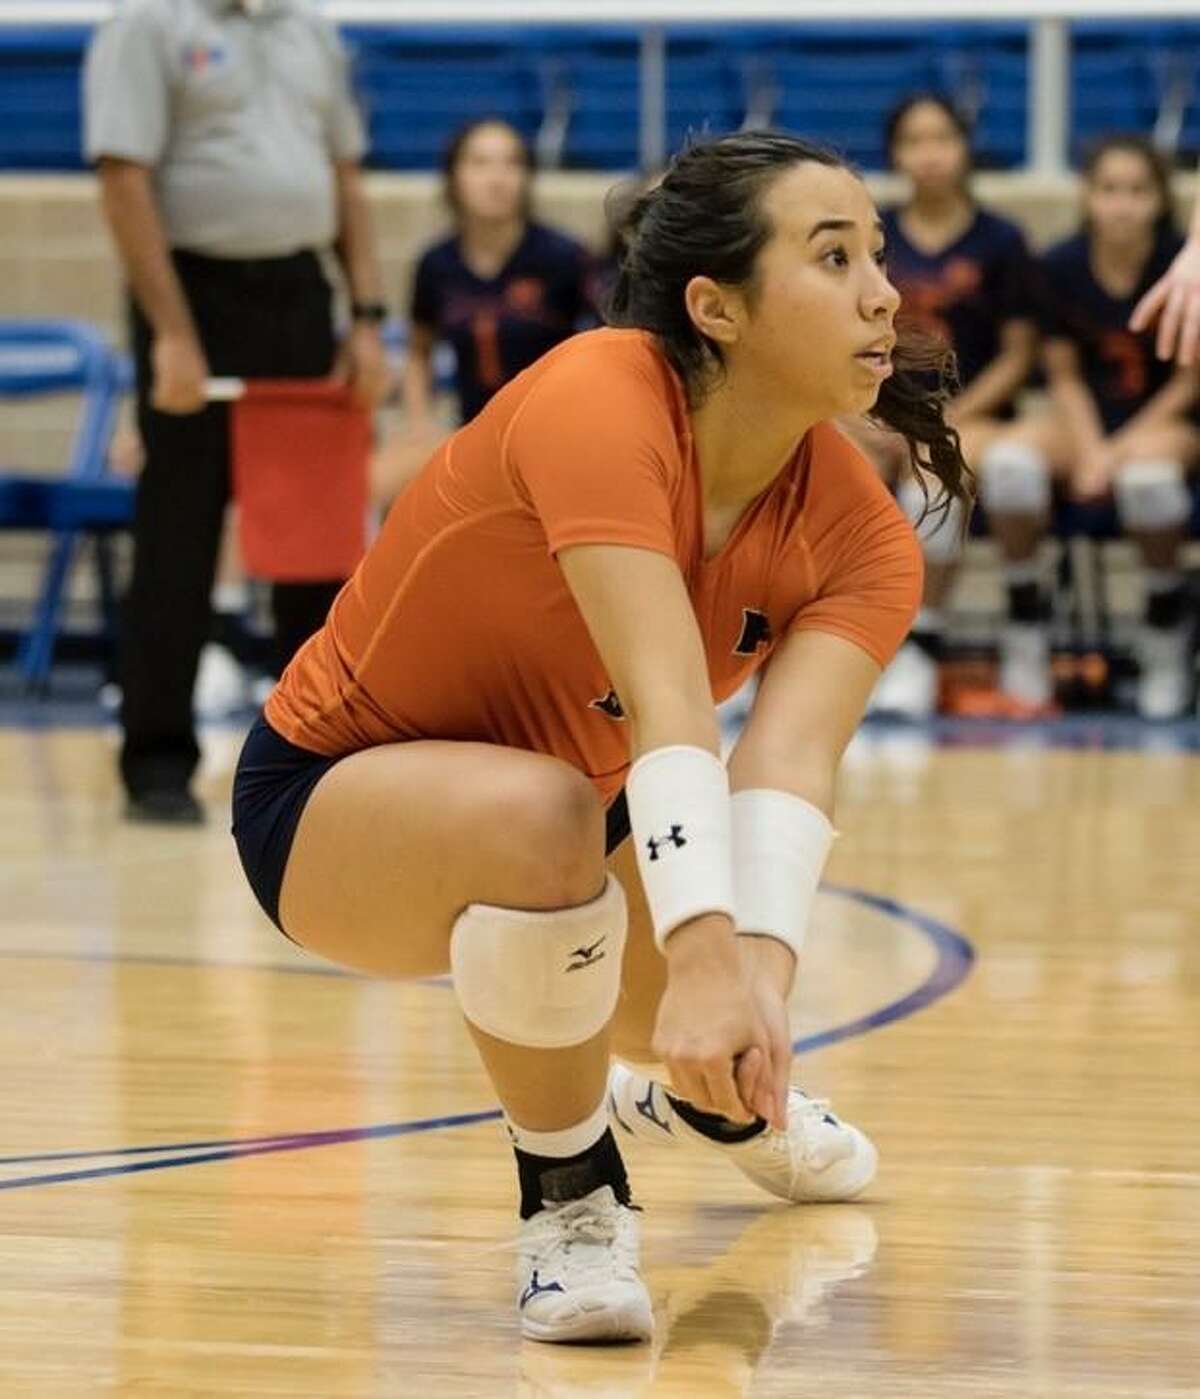 Lola Davila combined for 75 digs in four-set victories over Madison and Johnson.